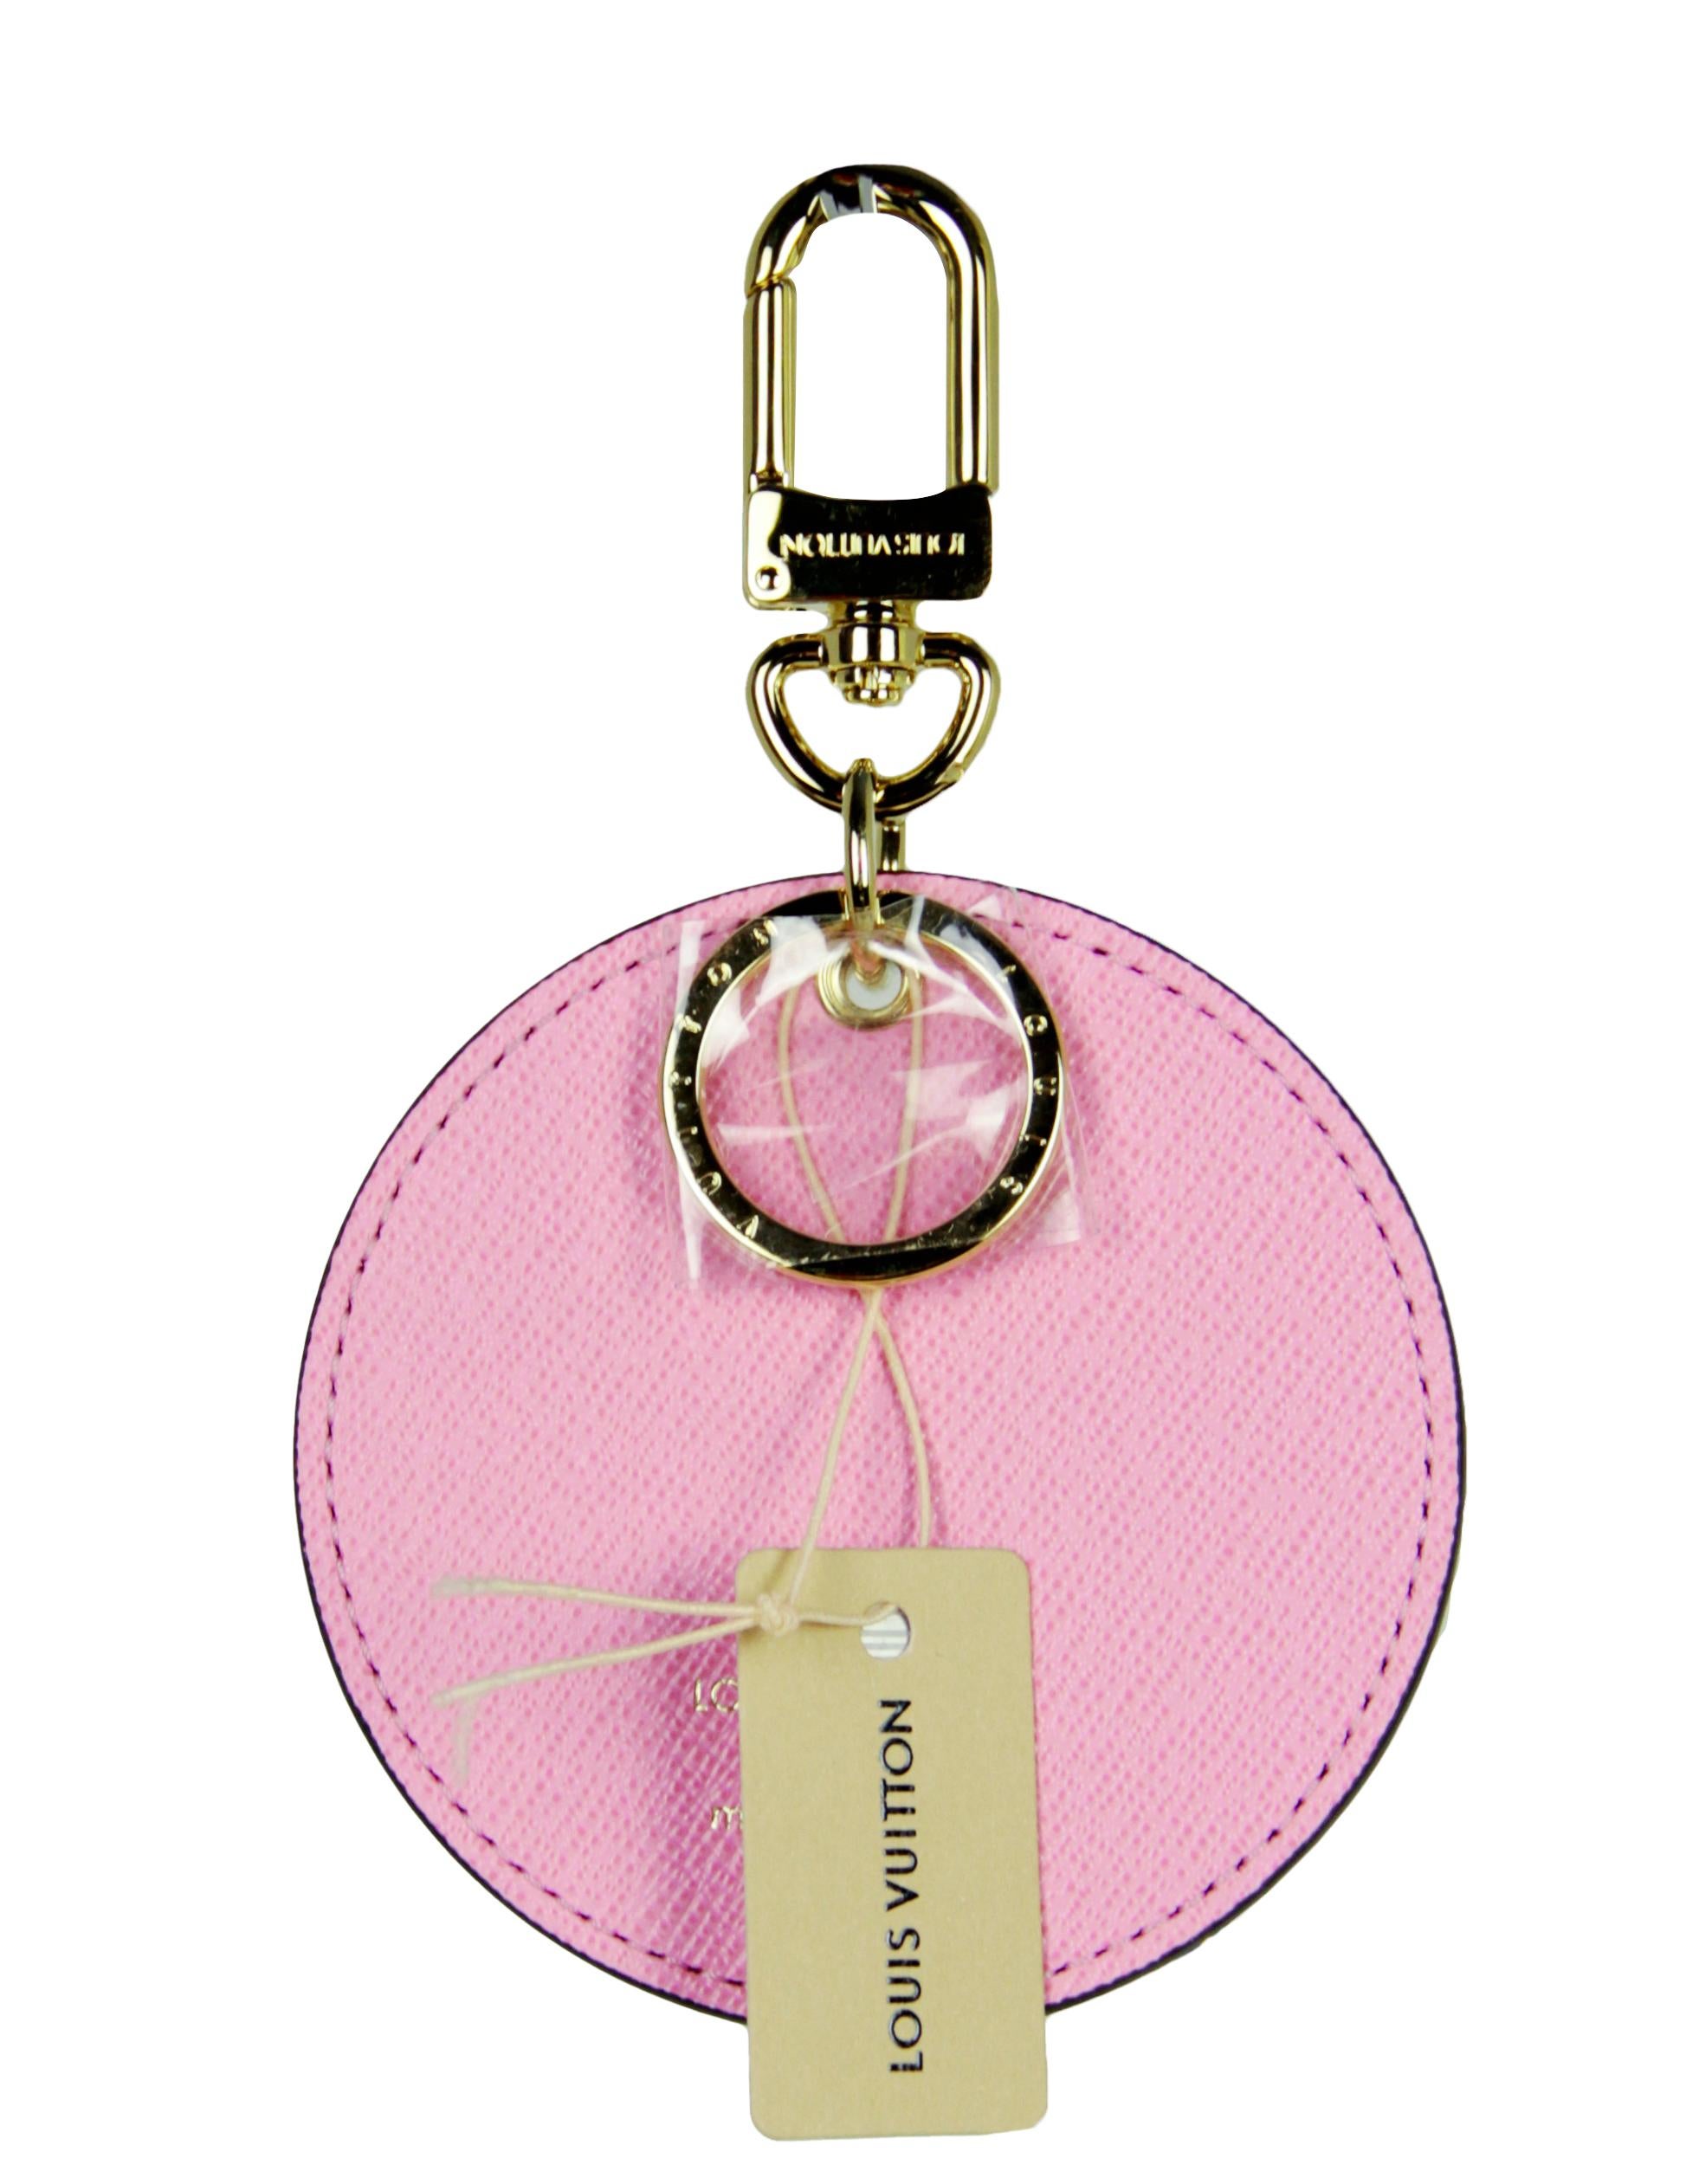 Louis Vuitton '22 Illustre Xmas Paris Monogram Bag Charm/ Key Holder 

Made In: France
Year of Production: 2022
Color: Brown and multicolor
Hardware: Goldtone
Materials: Coated canvas and pink grained cowhide-leather
Exterior Condition: Like